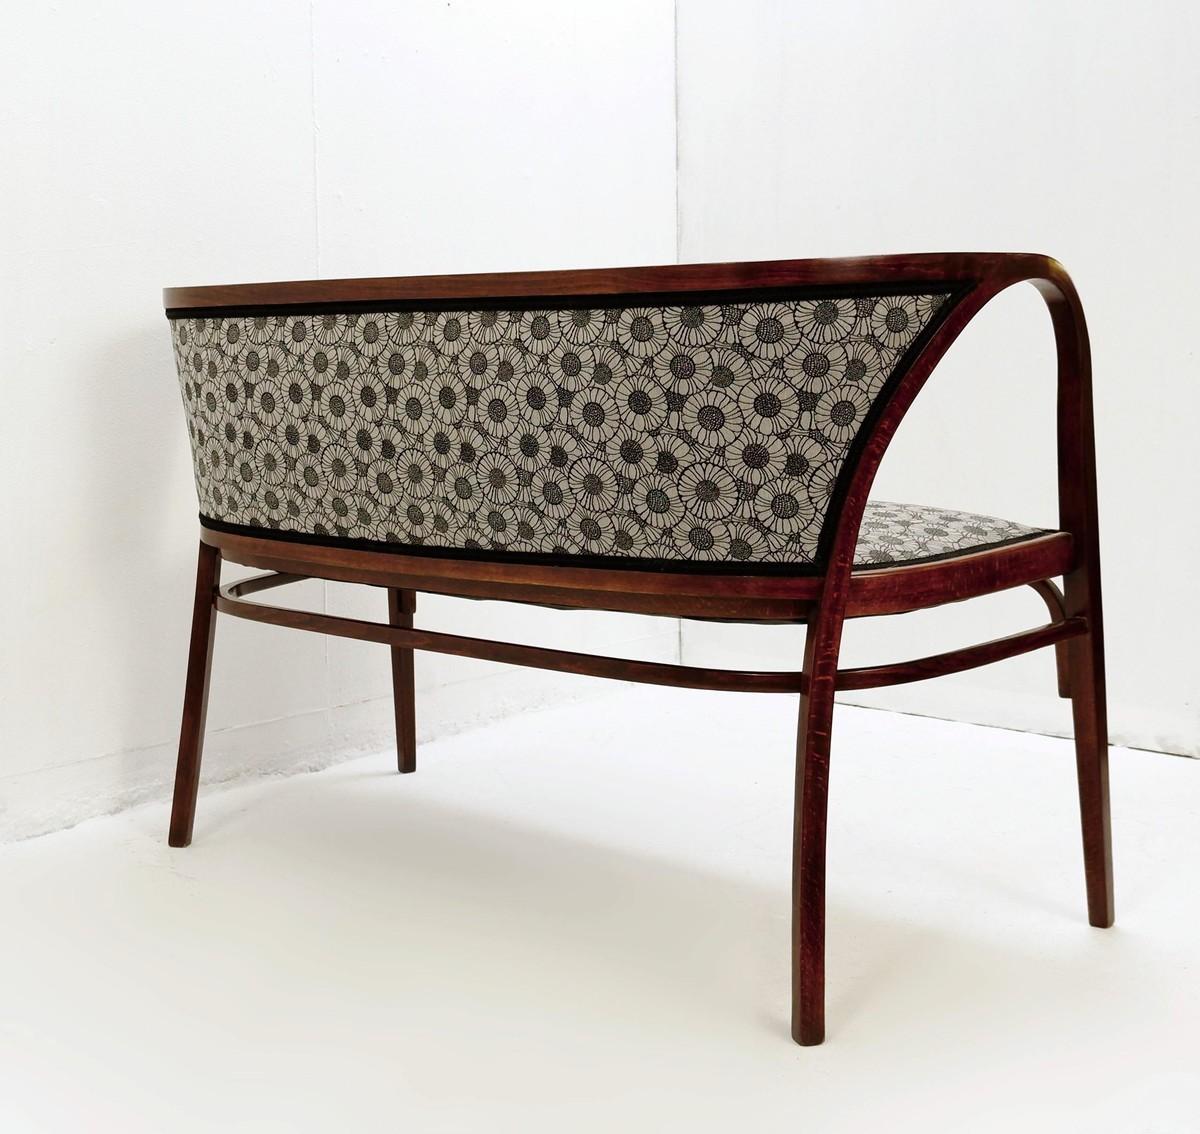 Mid-Century Modern Bench '6217' by Marcel Kammerer for Thonet, circa 1911